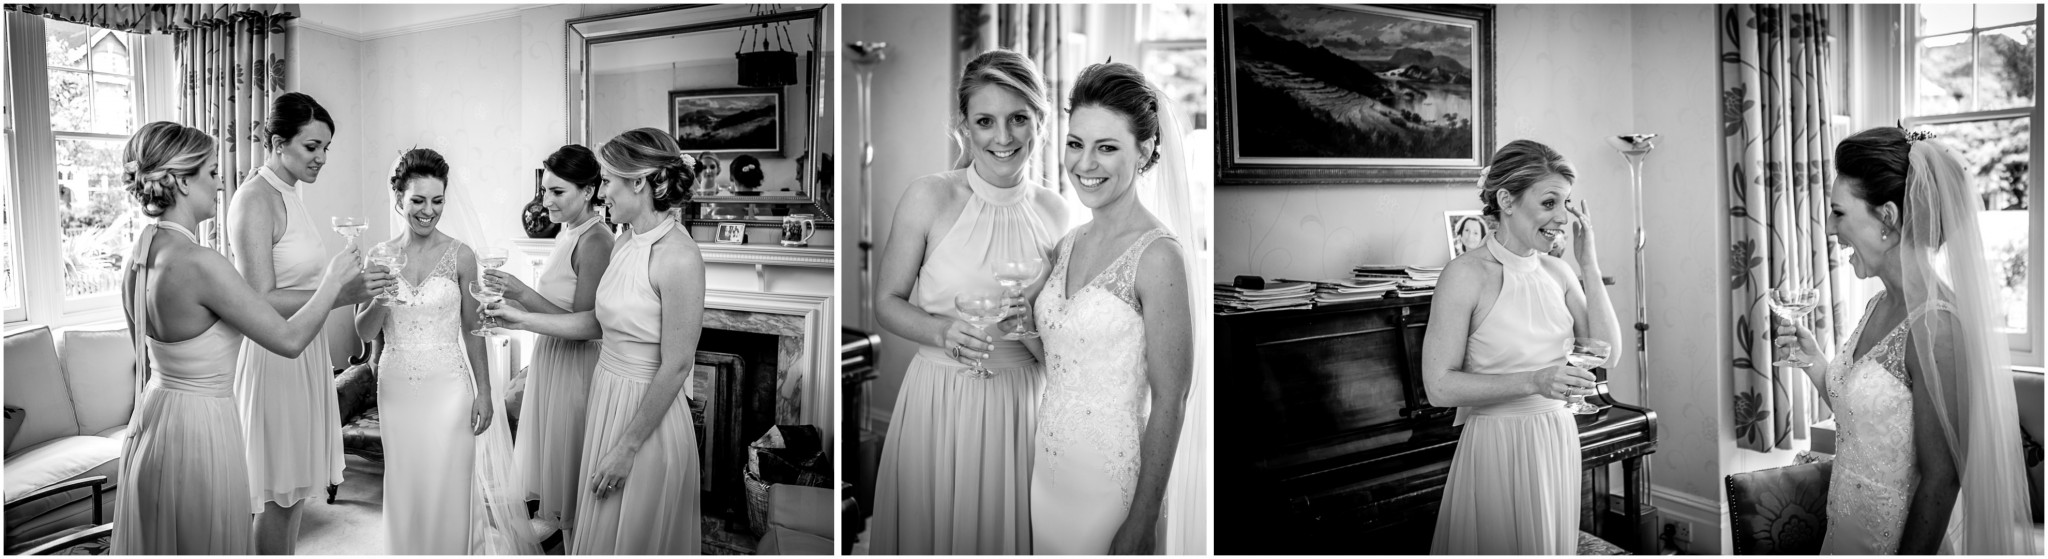 dulwich-picture-gallery-wedding-photography-010